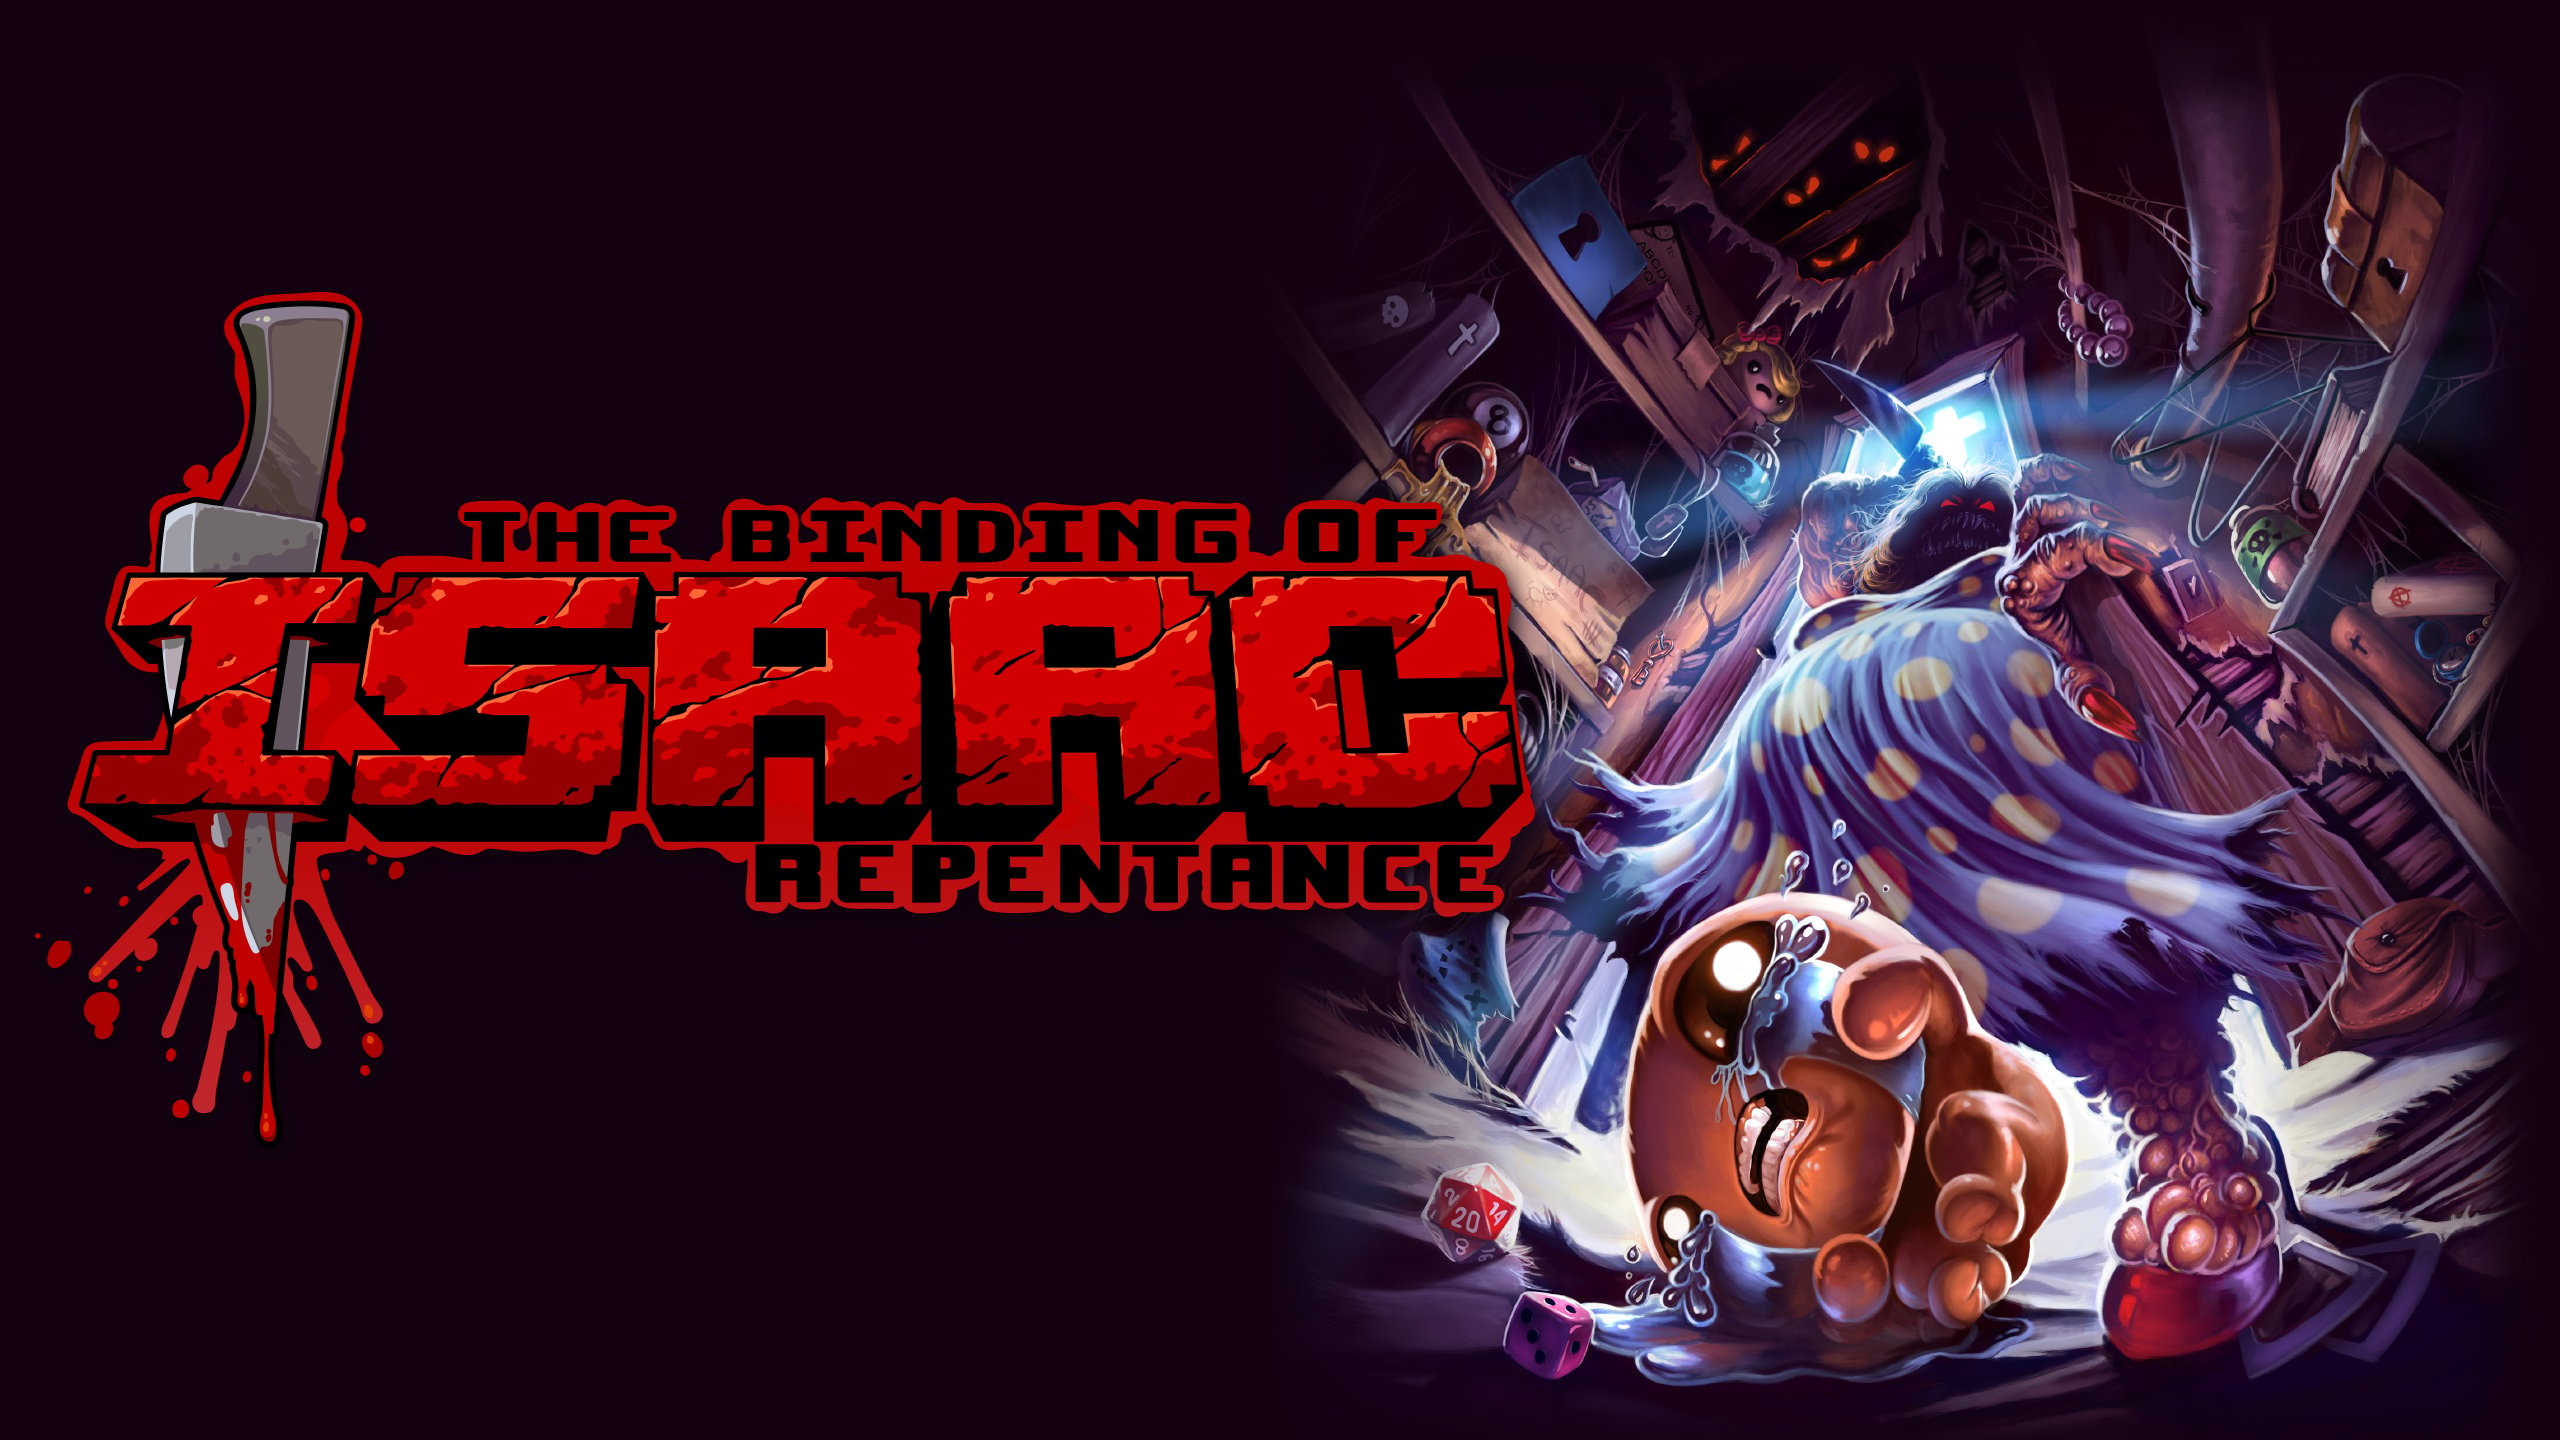 The Binding of Isaac: Repentance. Download and Buy Today Games Store